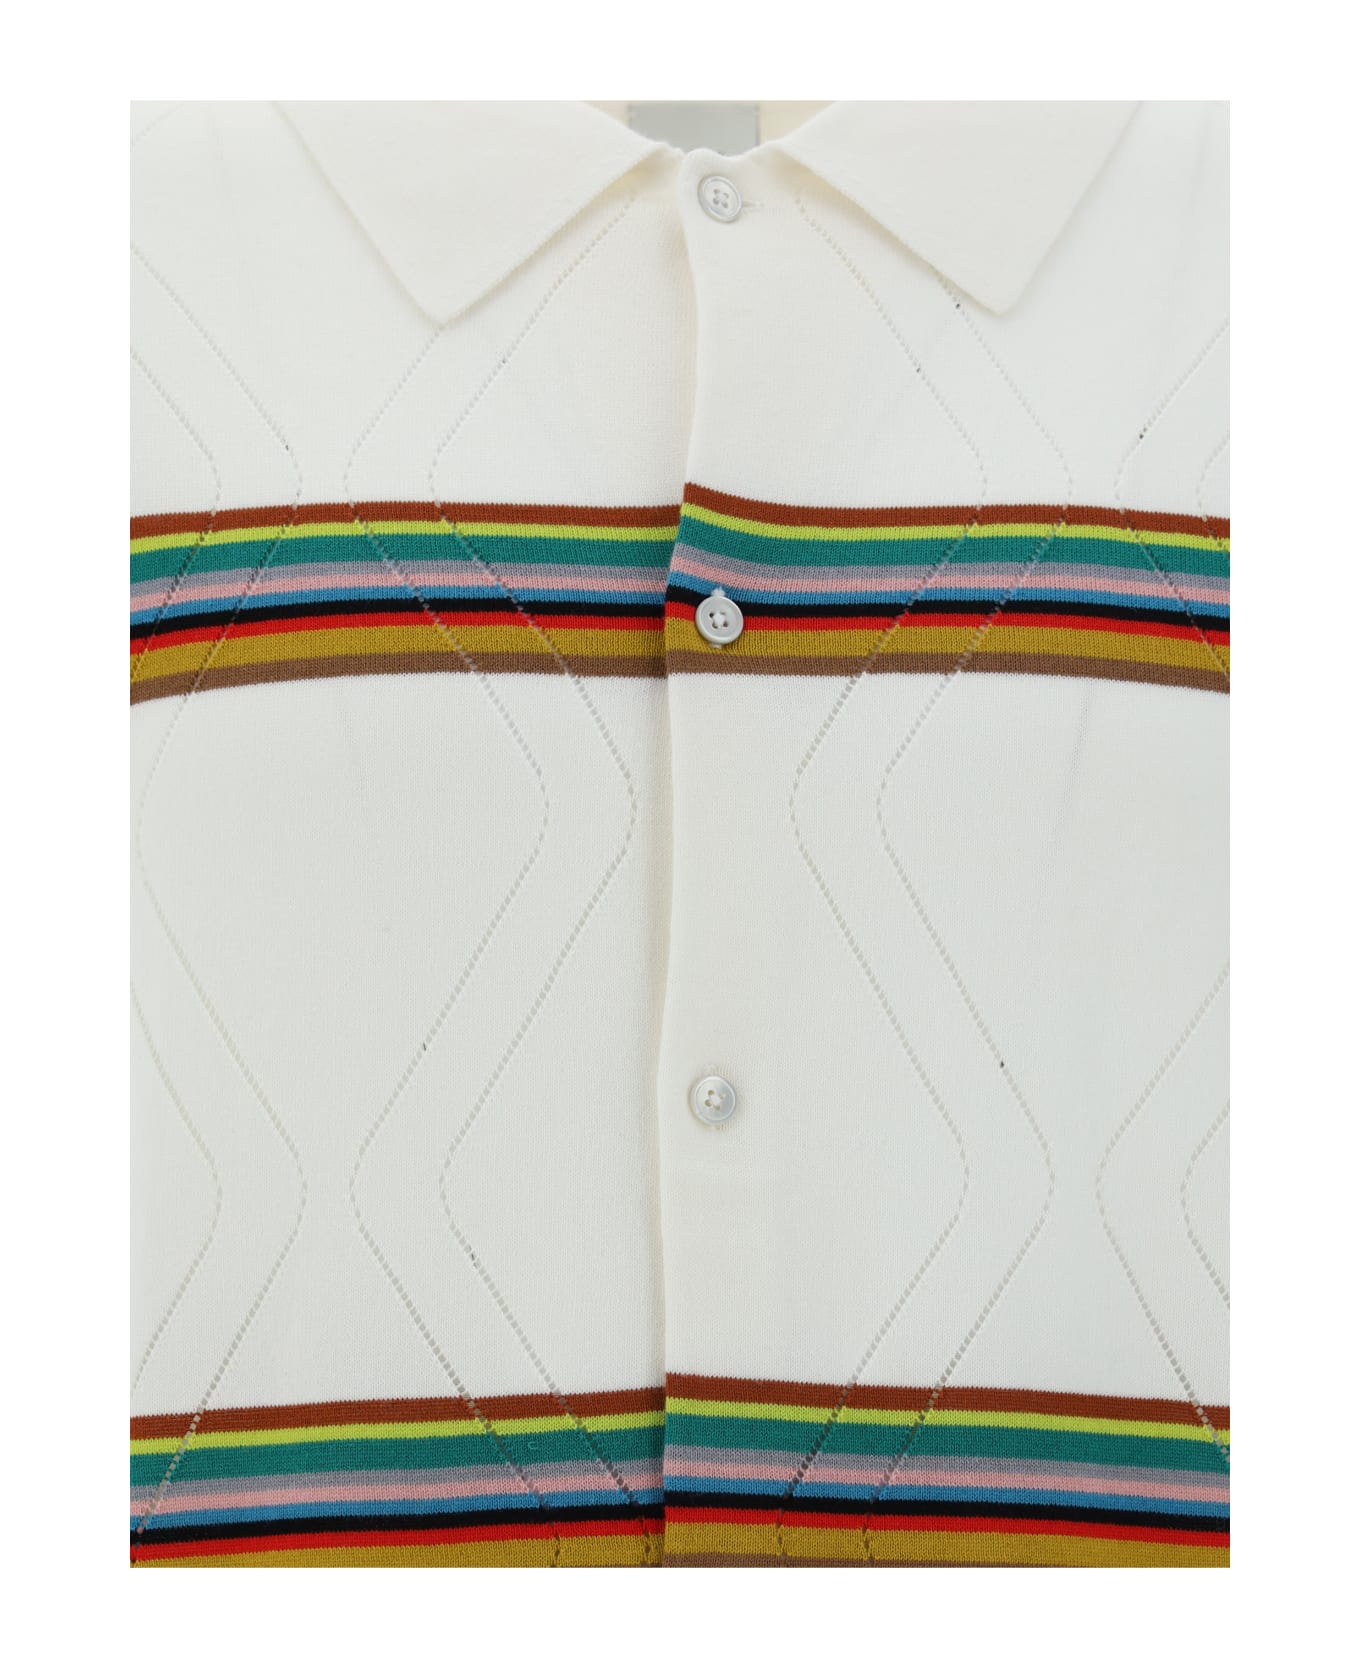 Paul Smith Knitted Ss Shirt - Offwh シャツ